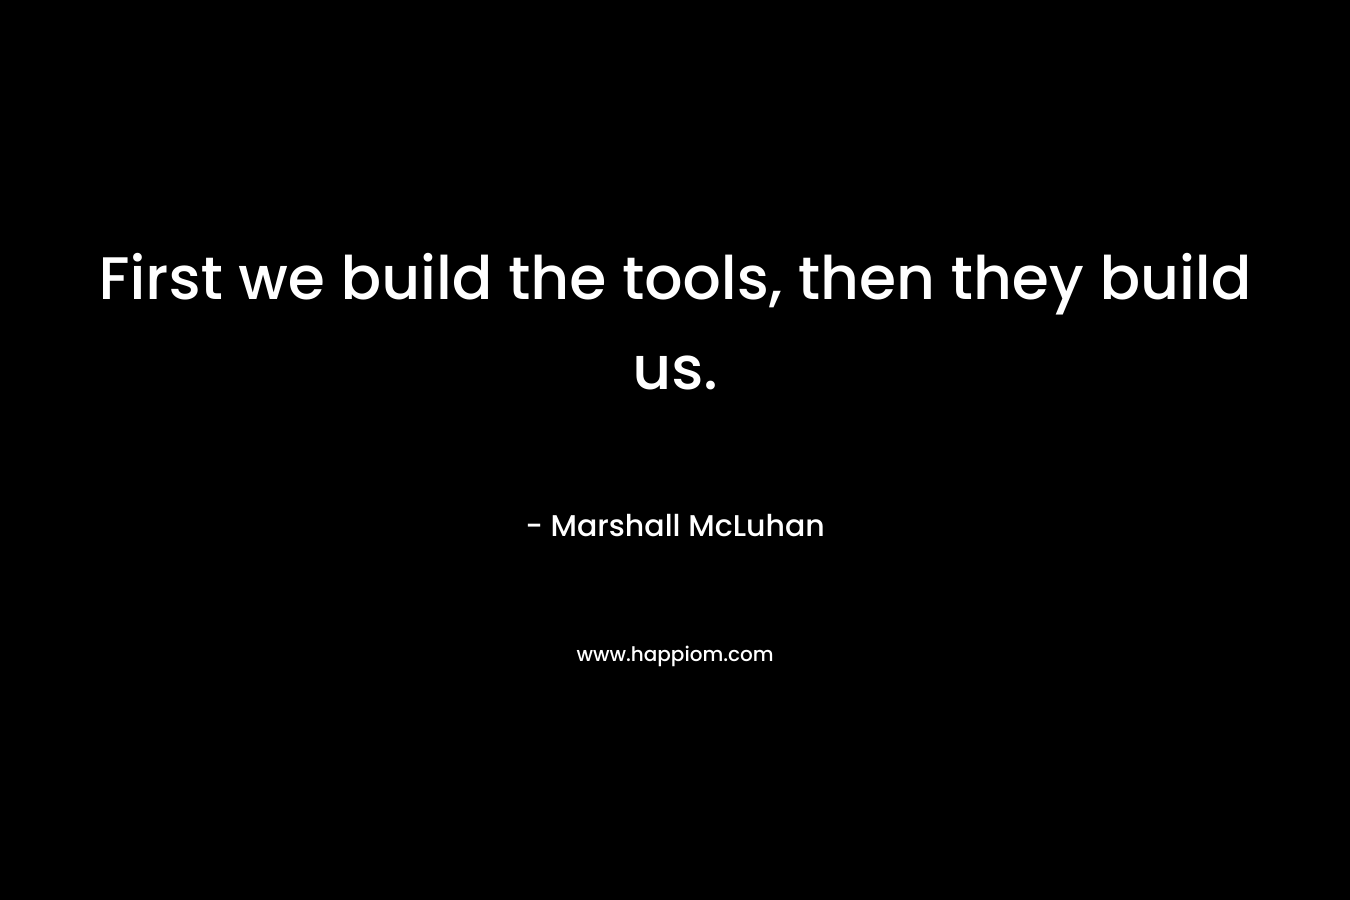 First we build the tools, then they build us.